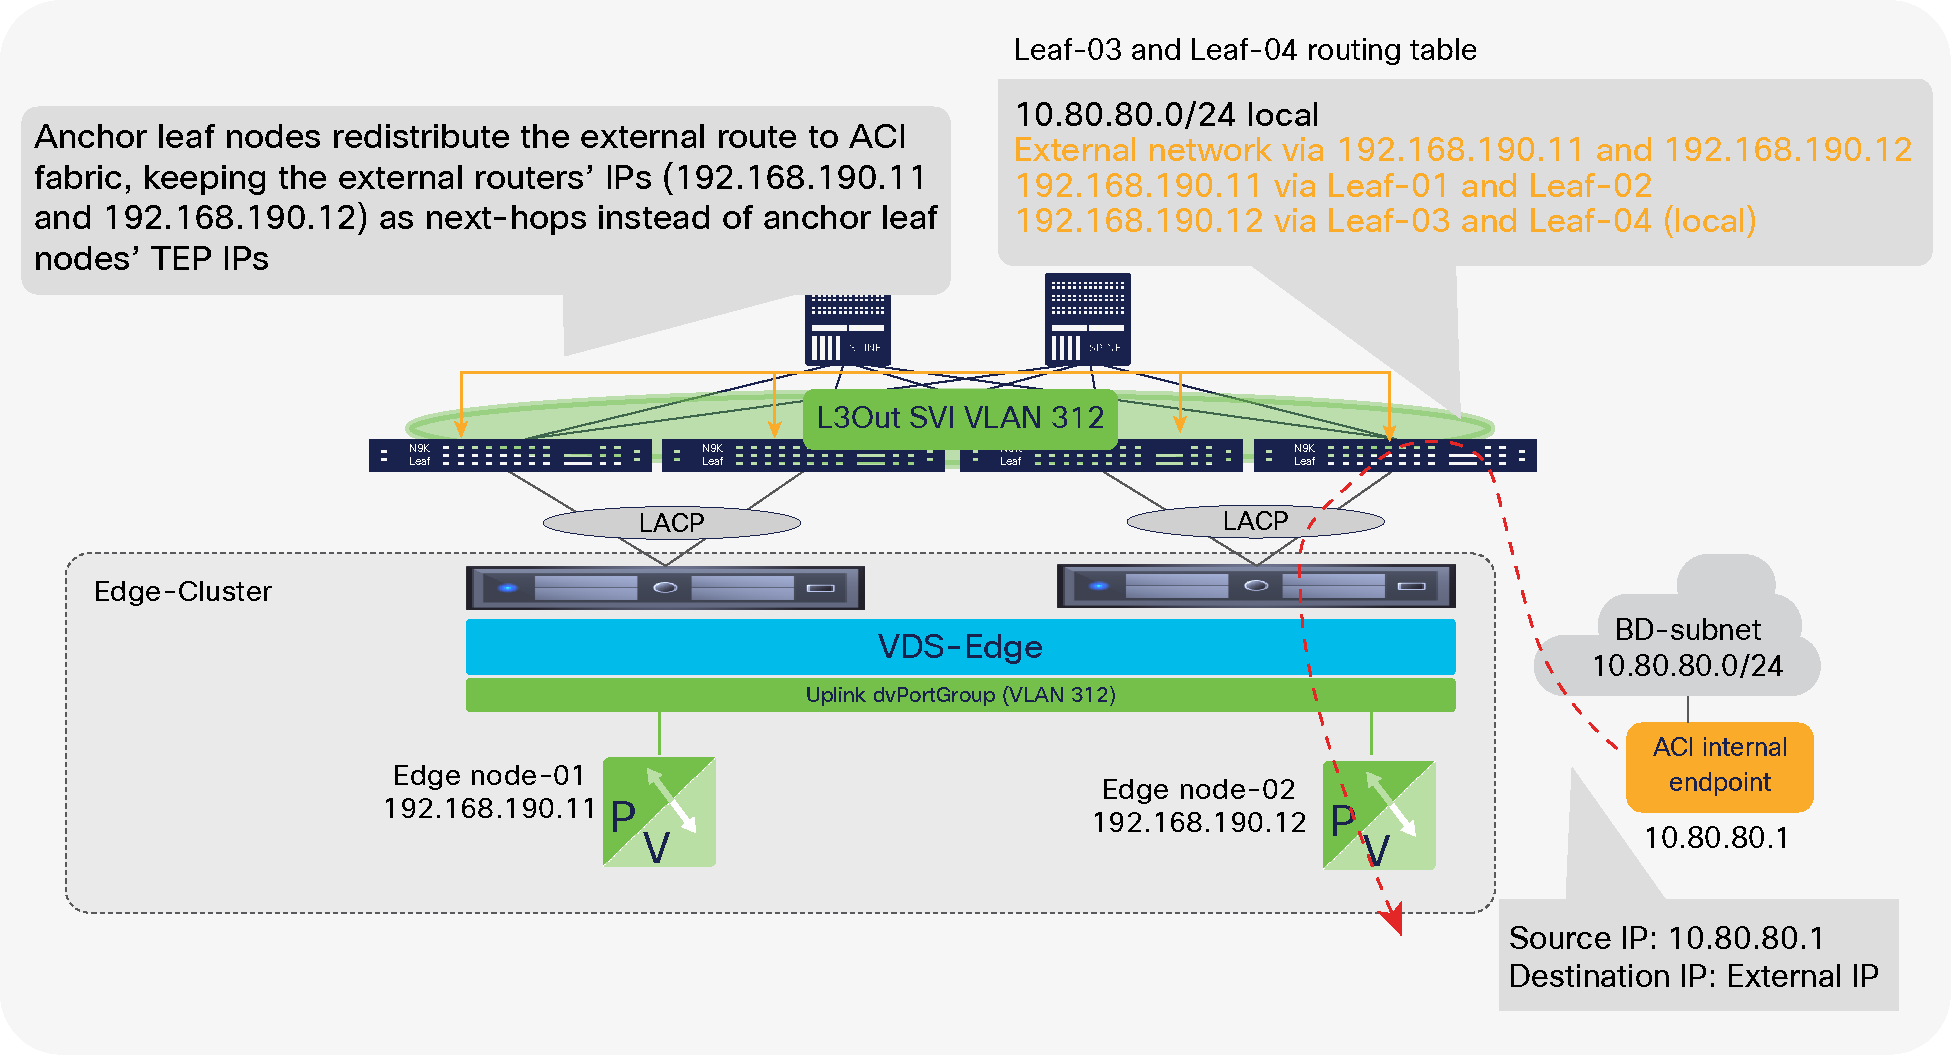 Traffic from a BD subnet to the external through edge nodes (internal to external traffic) with next-hop propagation